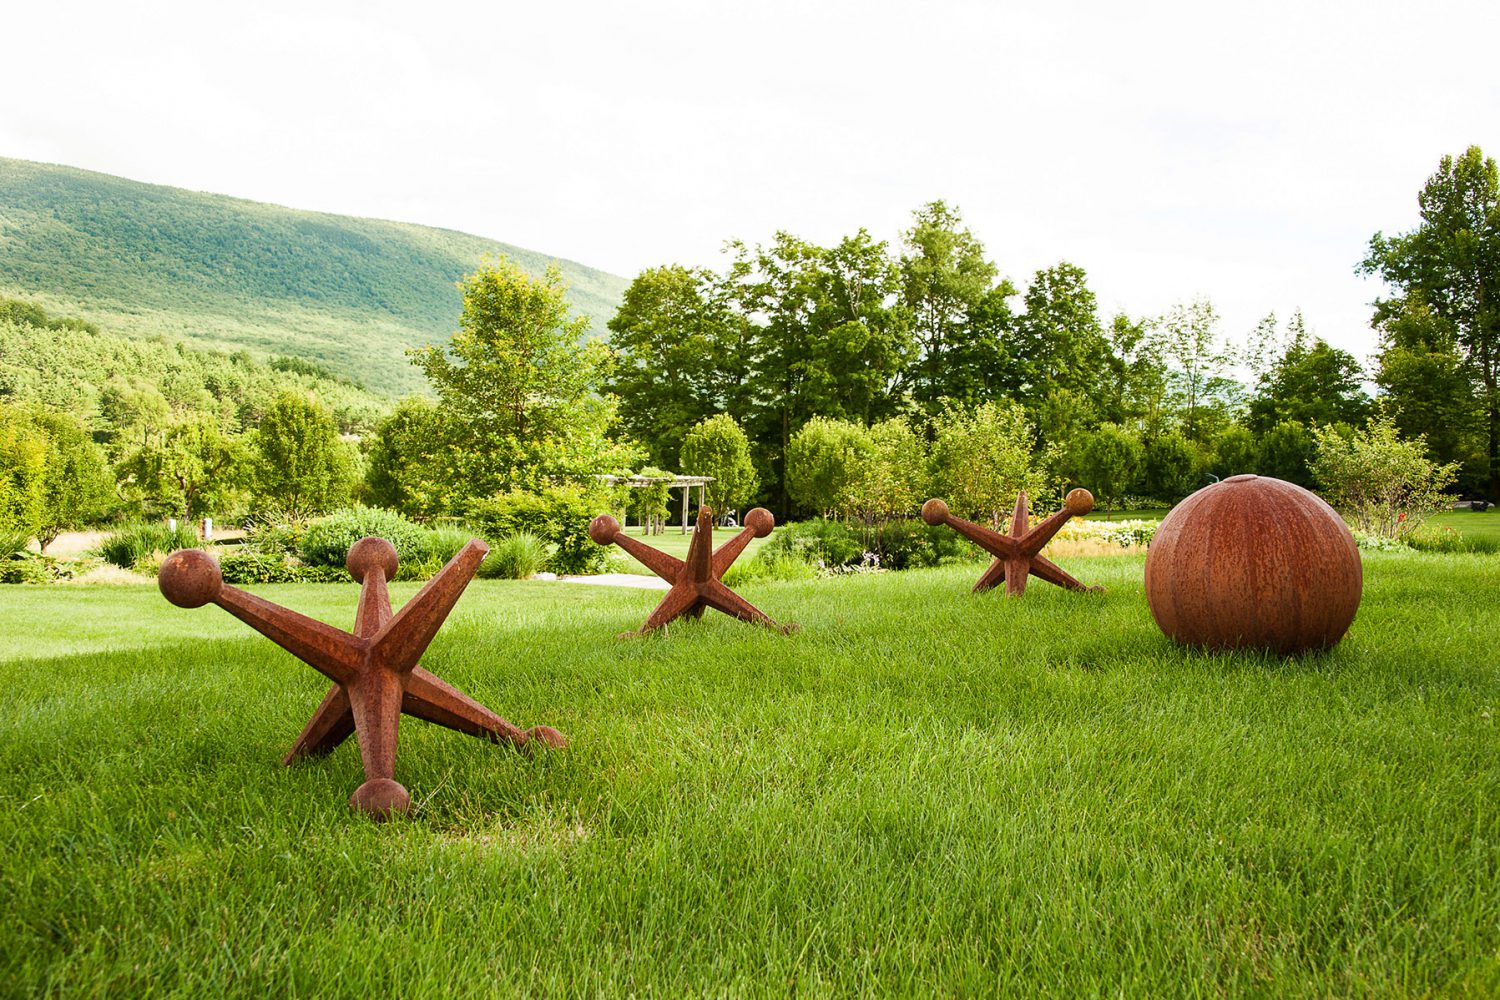 Giant jacks and ball by sculptor David Tanych.